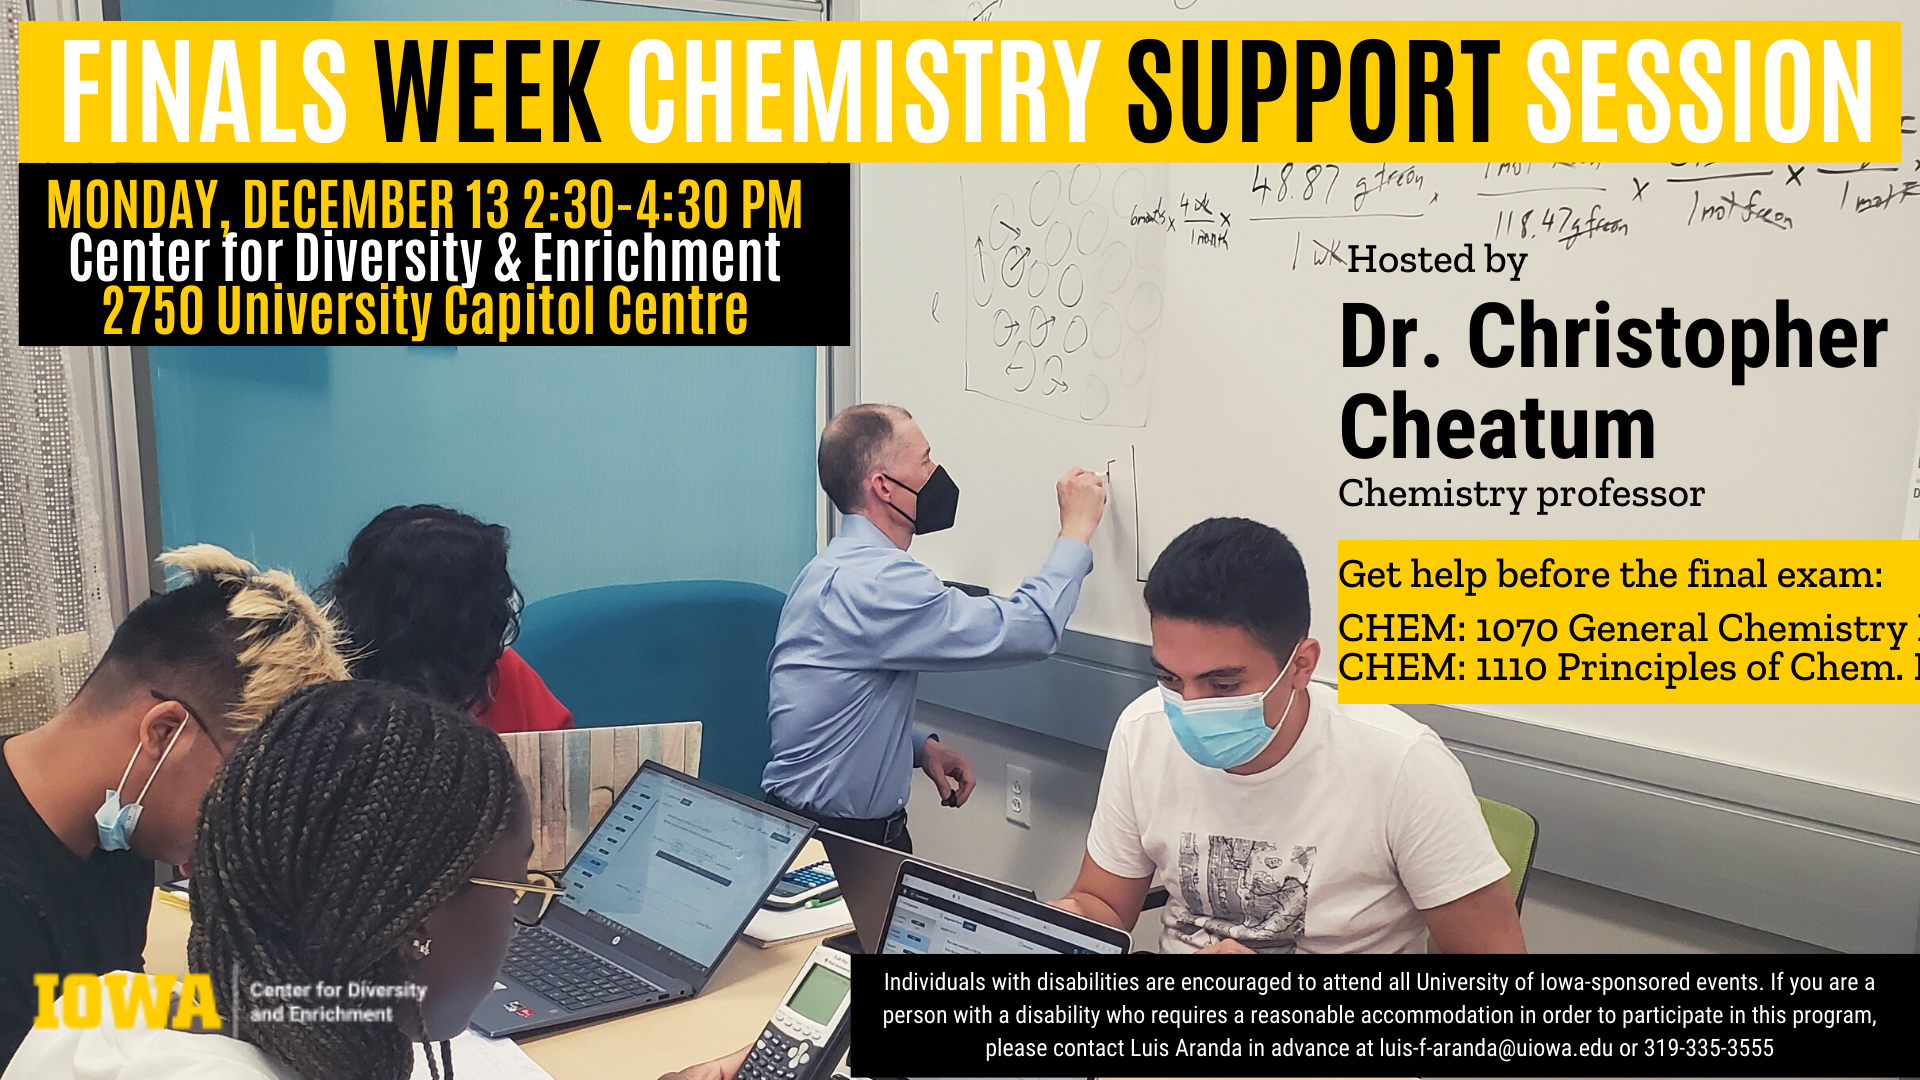 An ad for Chemistry Support Sessions hosted by Dr. Christopher Cheatum, Chemistry Professor. Individuals with disabilities are encouraged to attend all University of Iowa-sponsored events. If you are a person with a disability who requires a reasonable accommodation in order to participate in this program, please contact Luis Aranda in advance at luis-f-aranda@uiowa.edu or 319-335-3555.